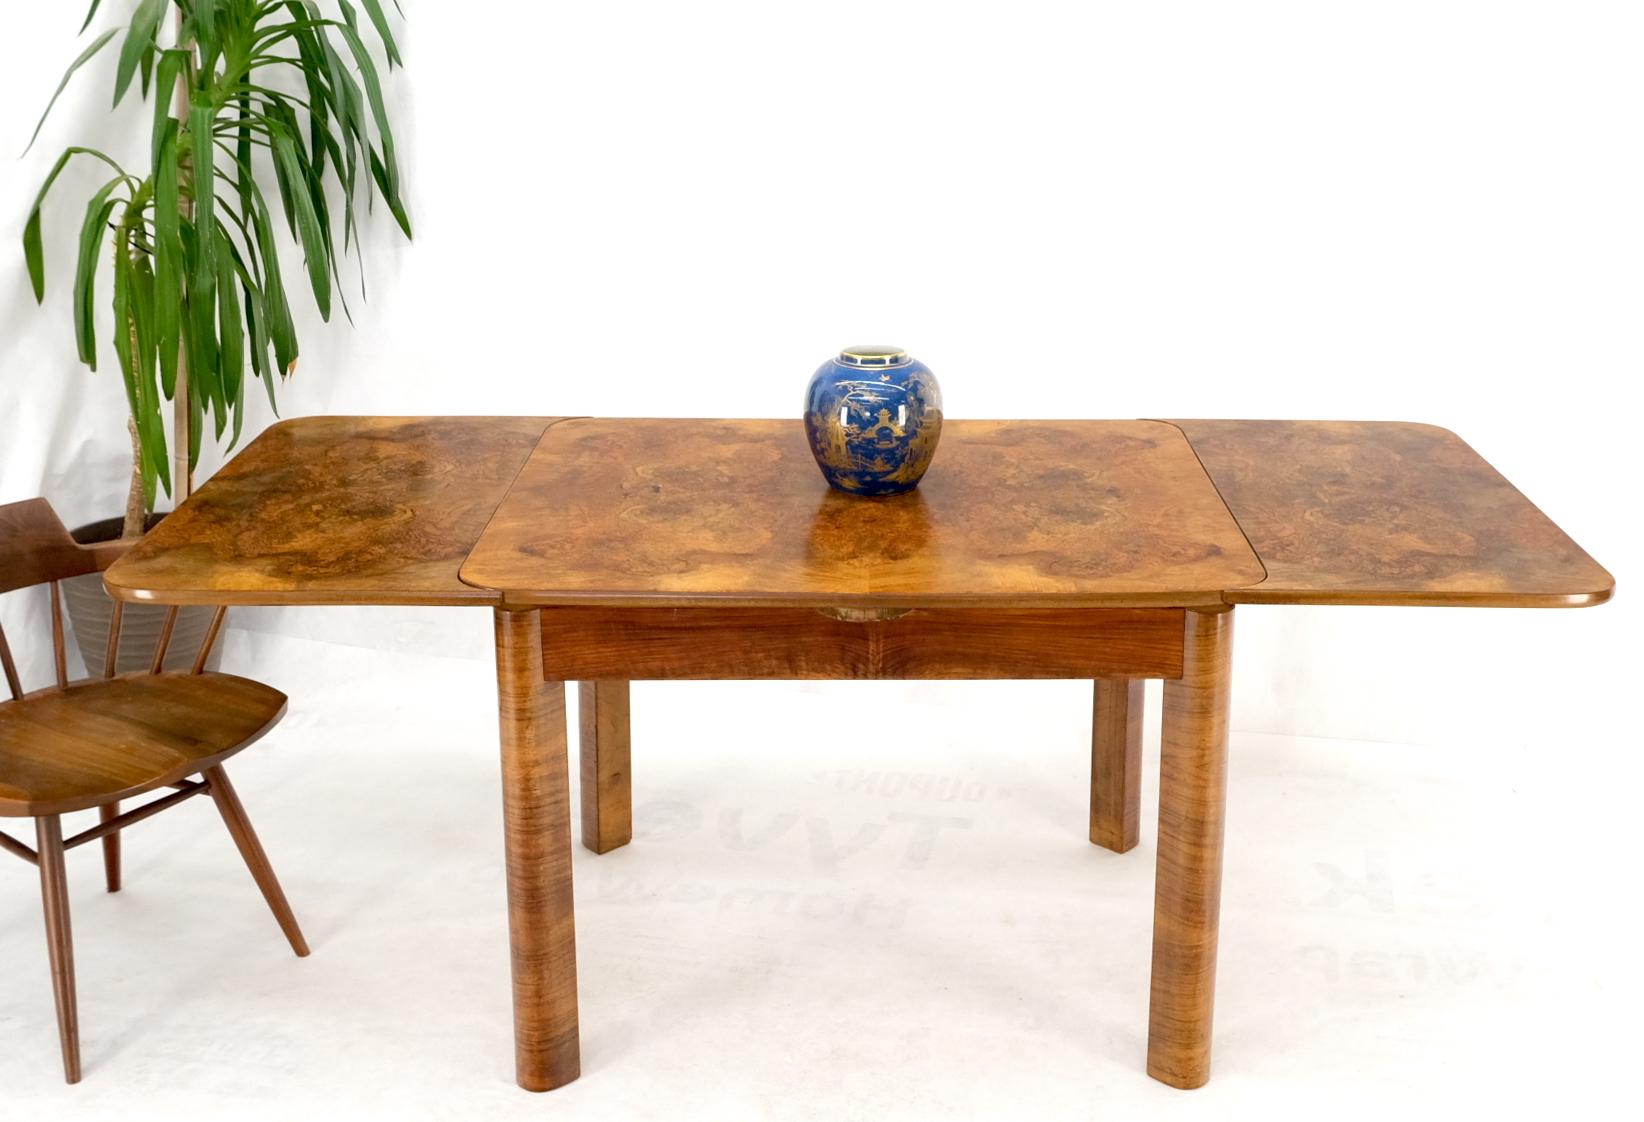 Swedish Mid-Century Modern Burl Wood Refectory Extending Dining Dinette Table For Sale 2